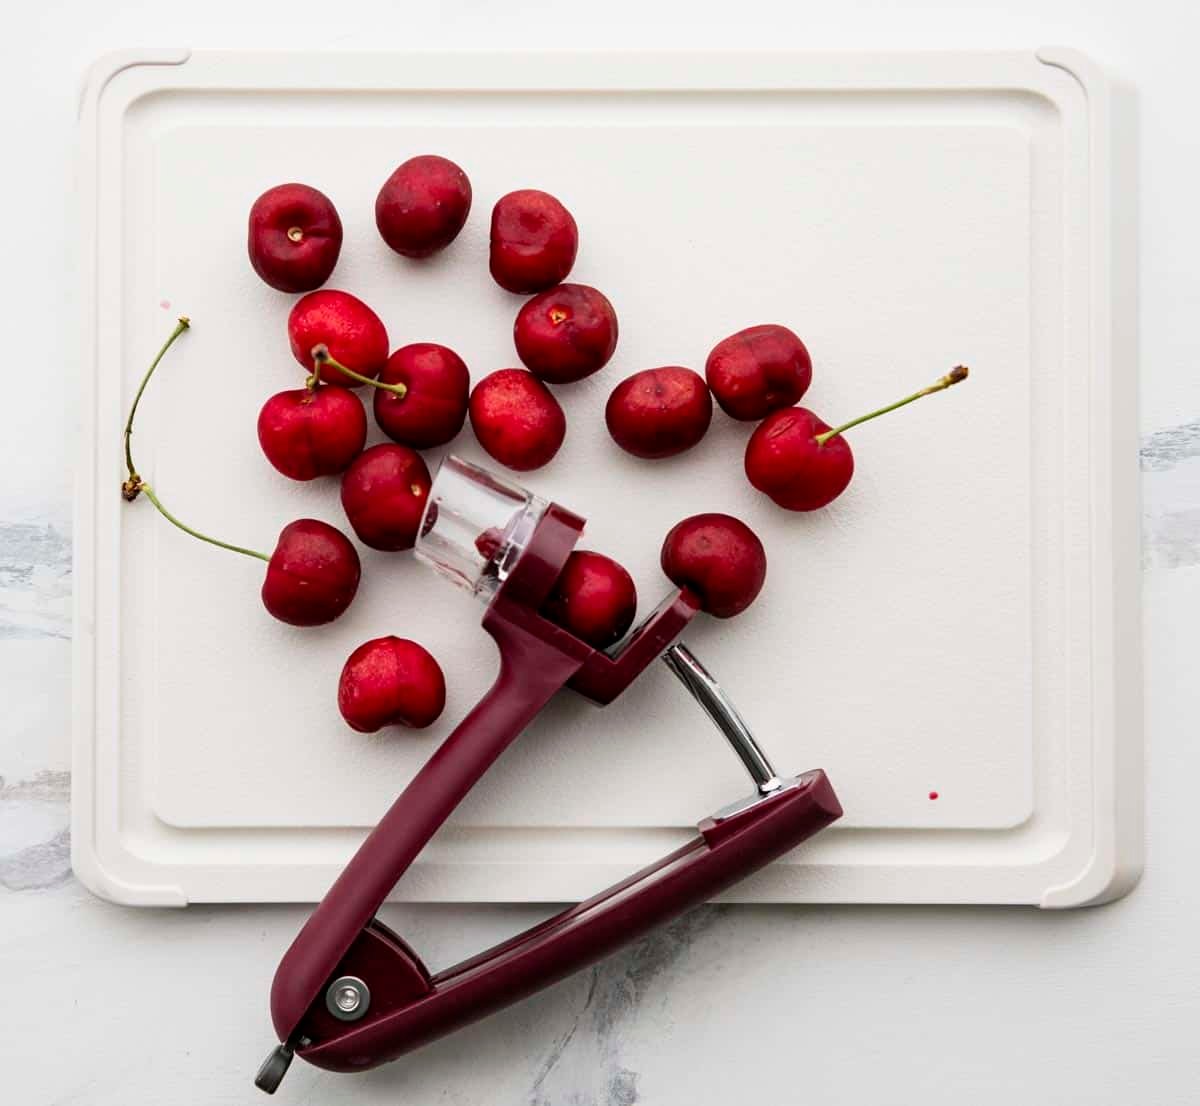 Overhead image of a cherry pitter on white cutting board with fresh cherries.